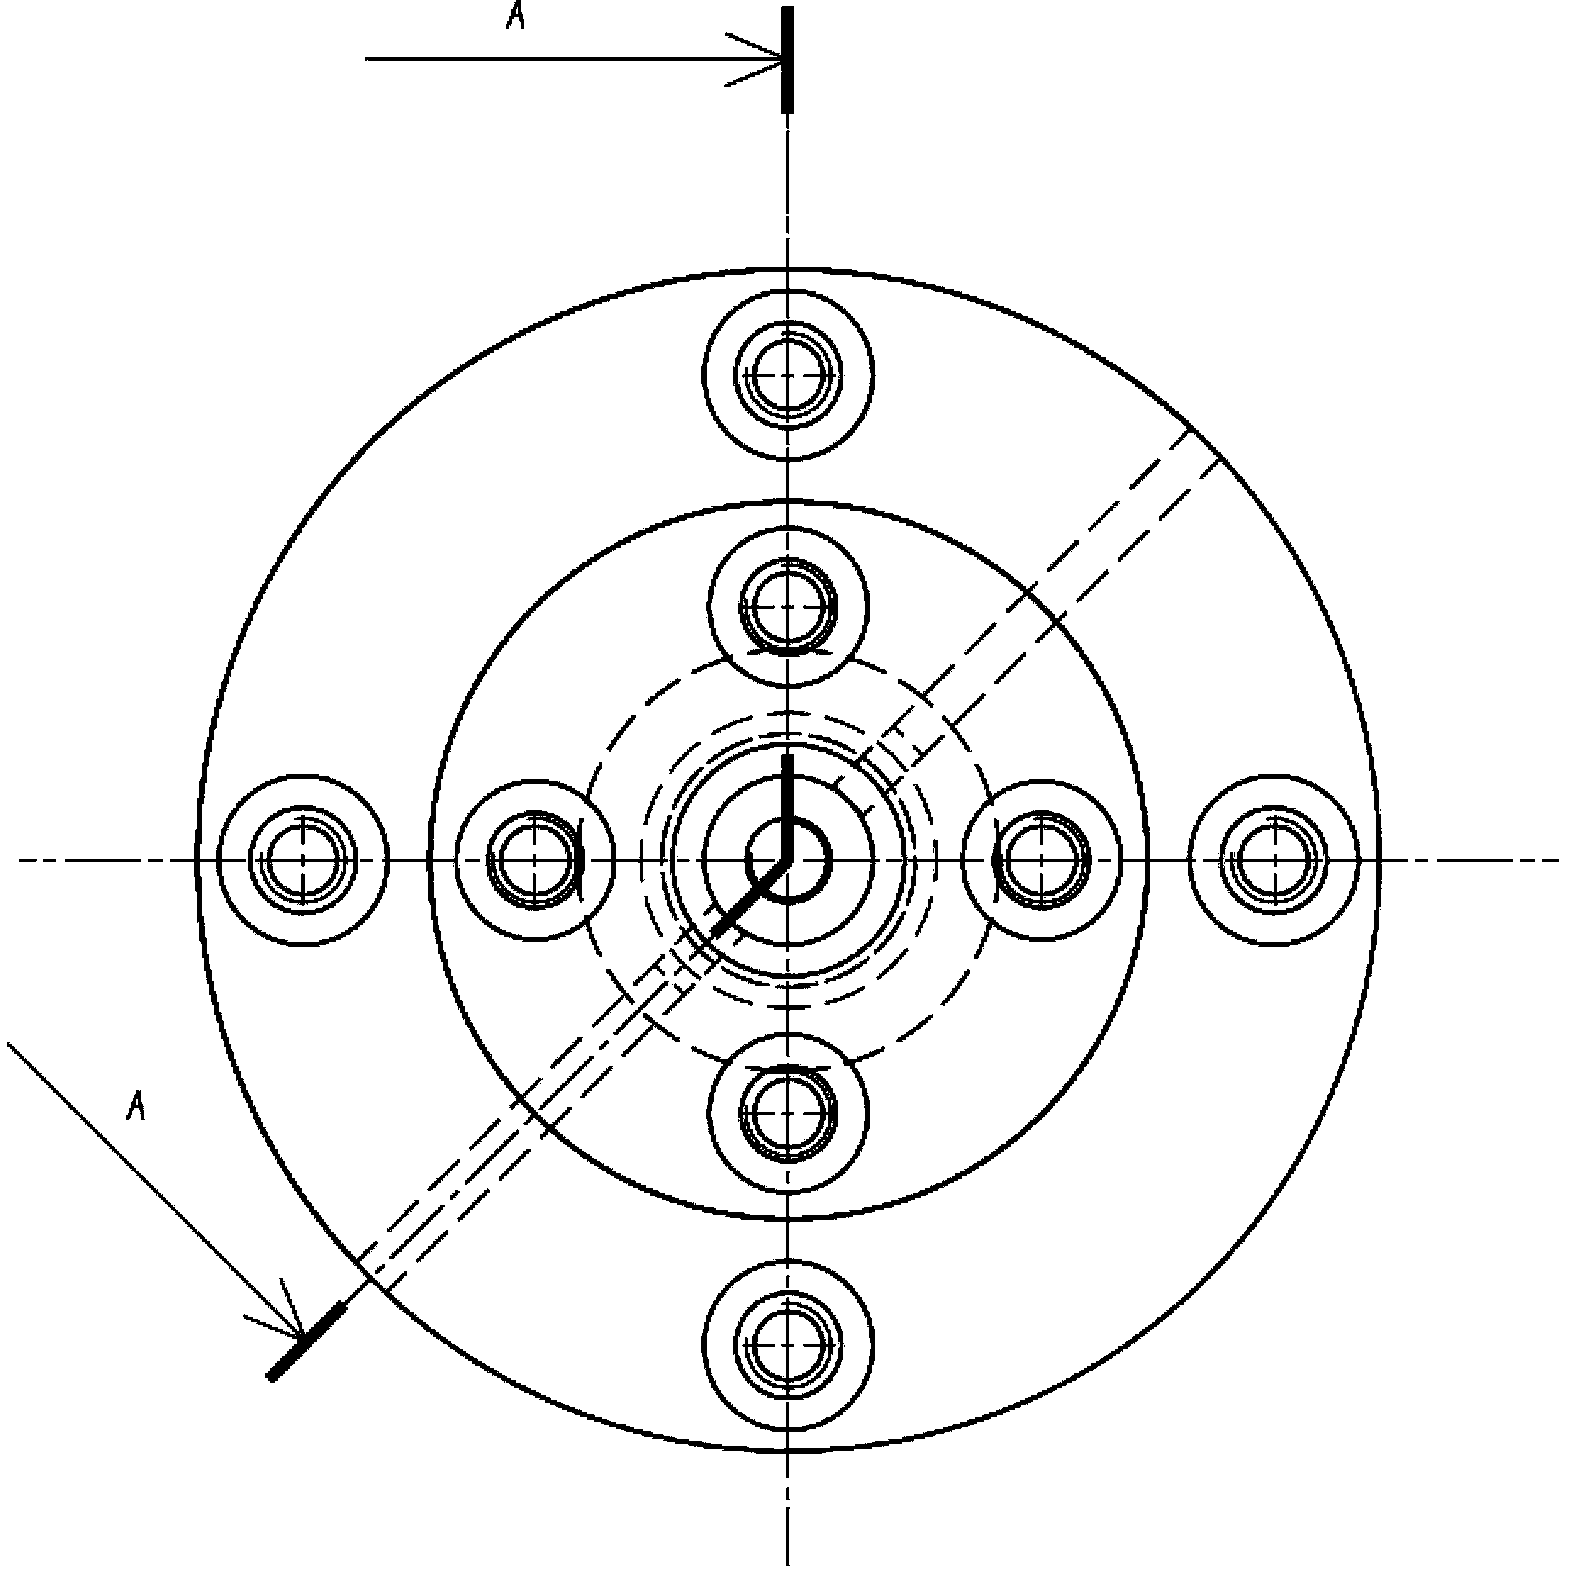 Vibration exciter based on piezoelectric stack